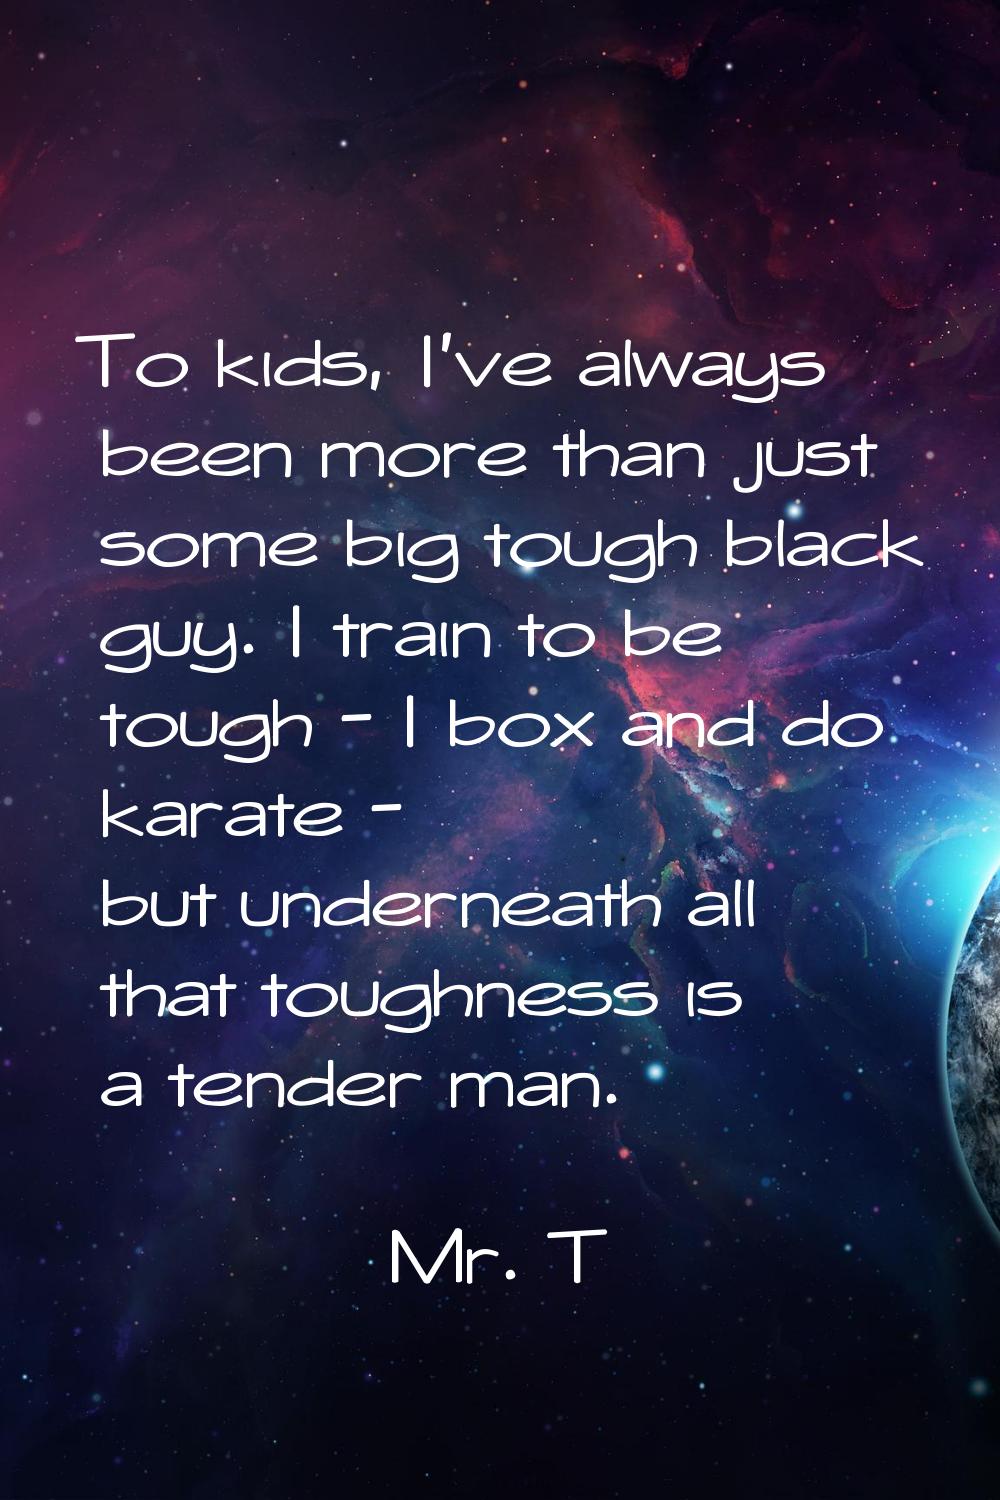 To kids, I've always been more than just some big tough black guy. I train to be tough - I box and 